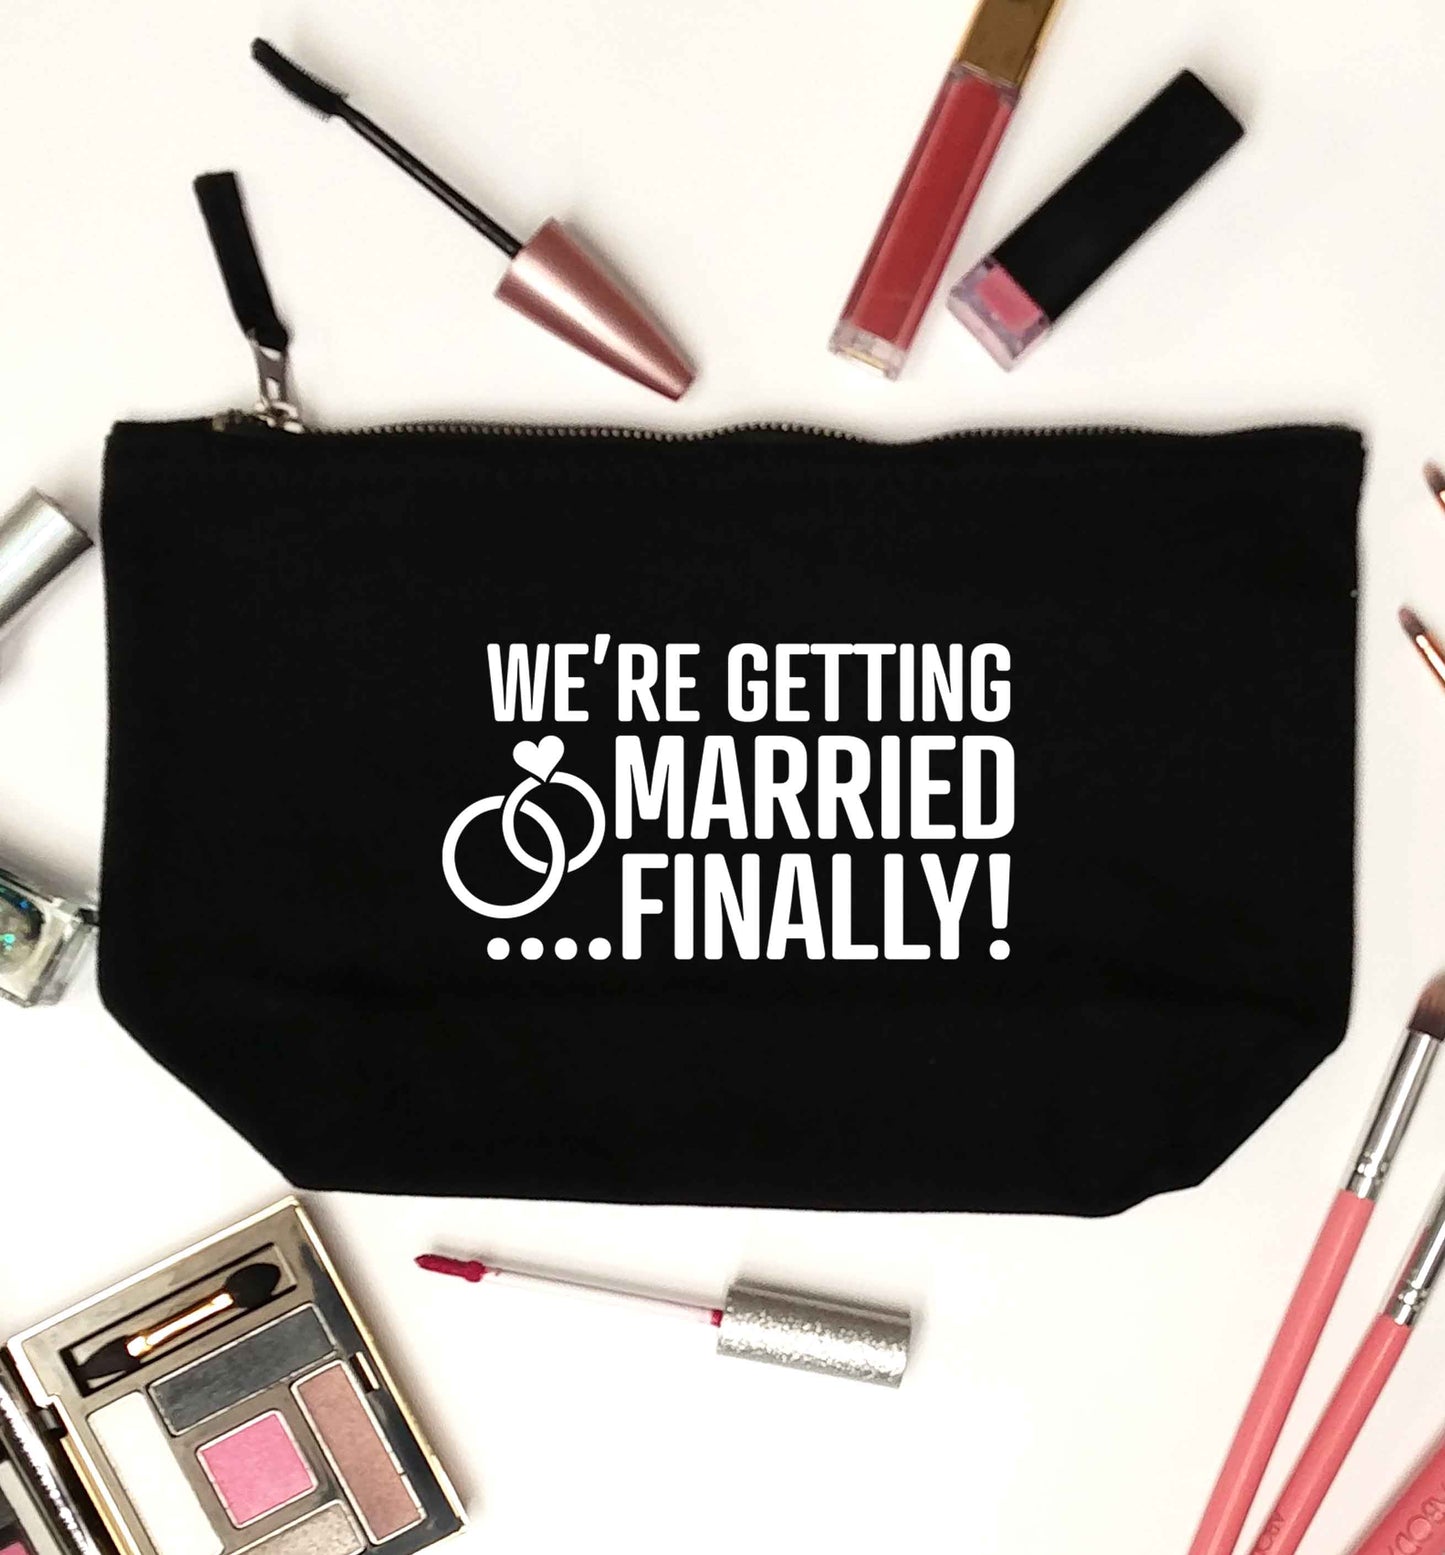 It's been a long wait but it's finally happening! Let everyone know you're celebrating your big day soon! black makeup bag